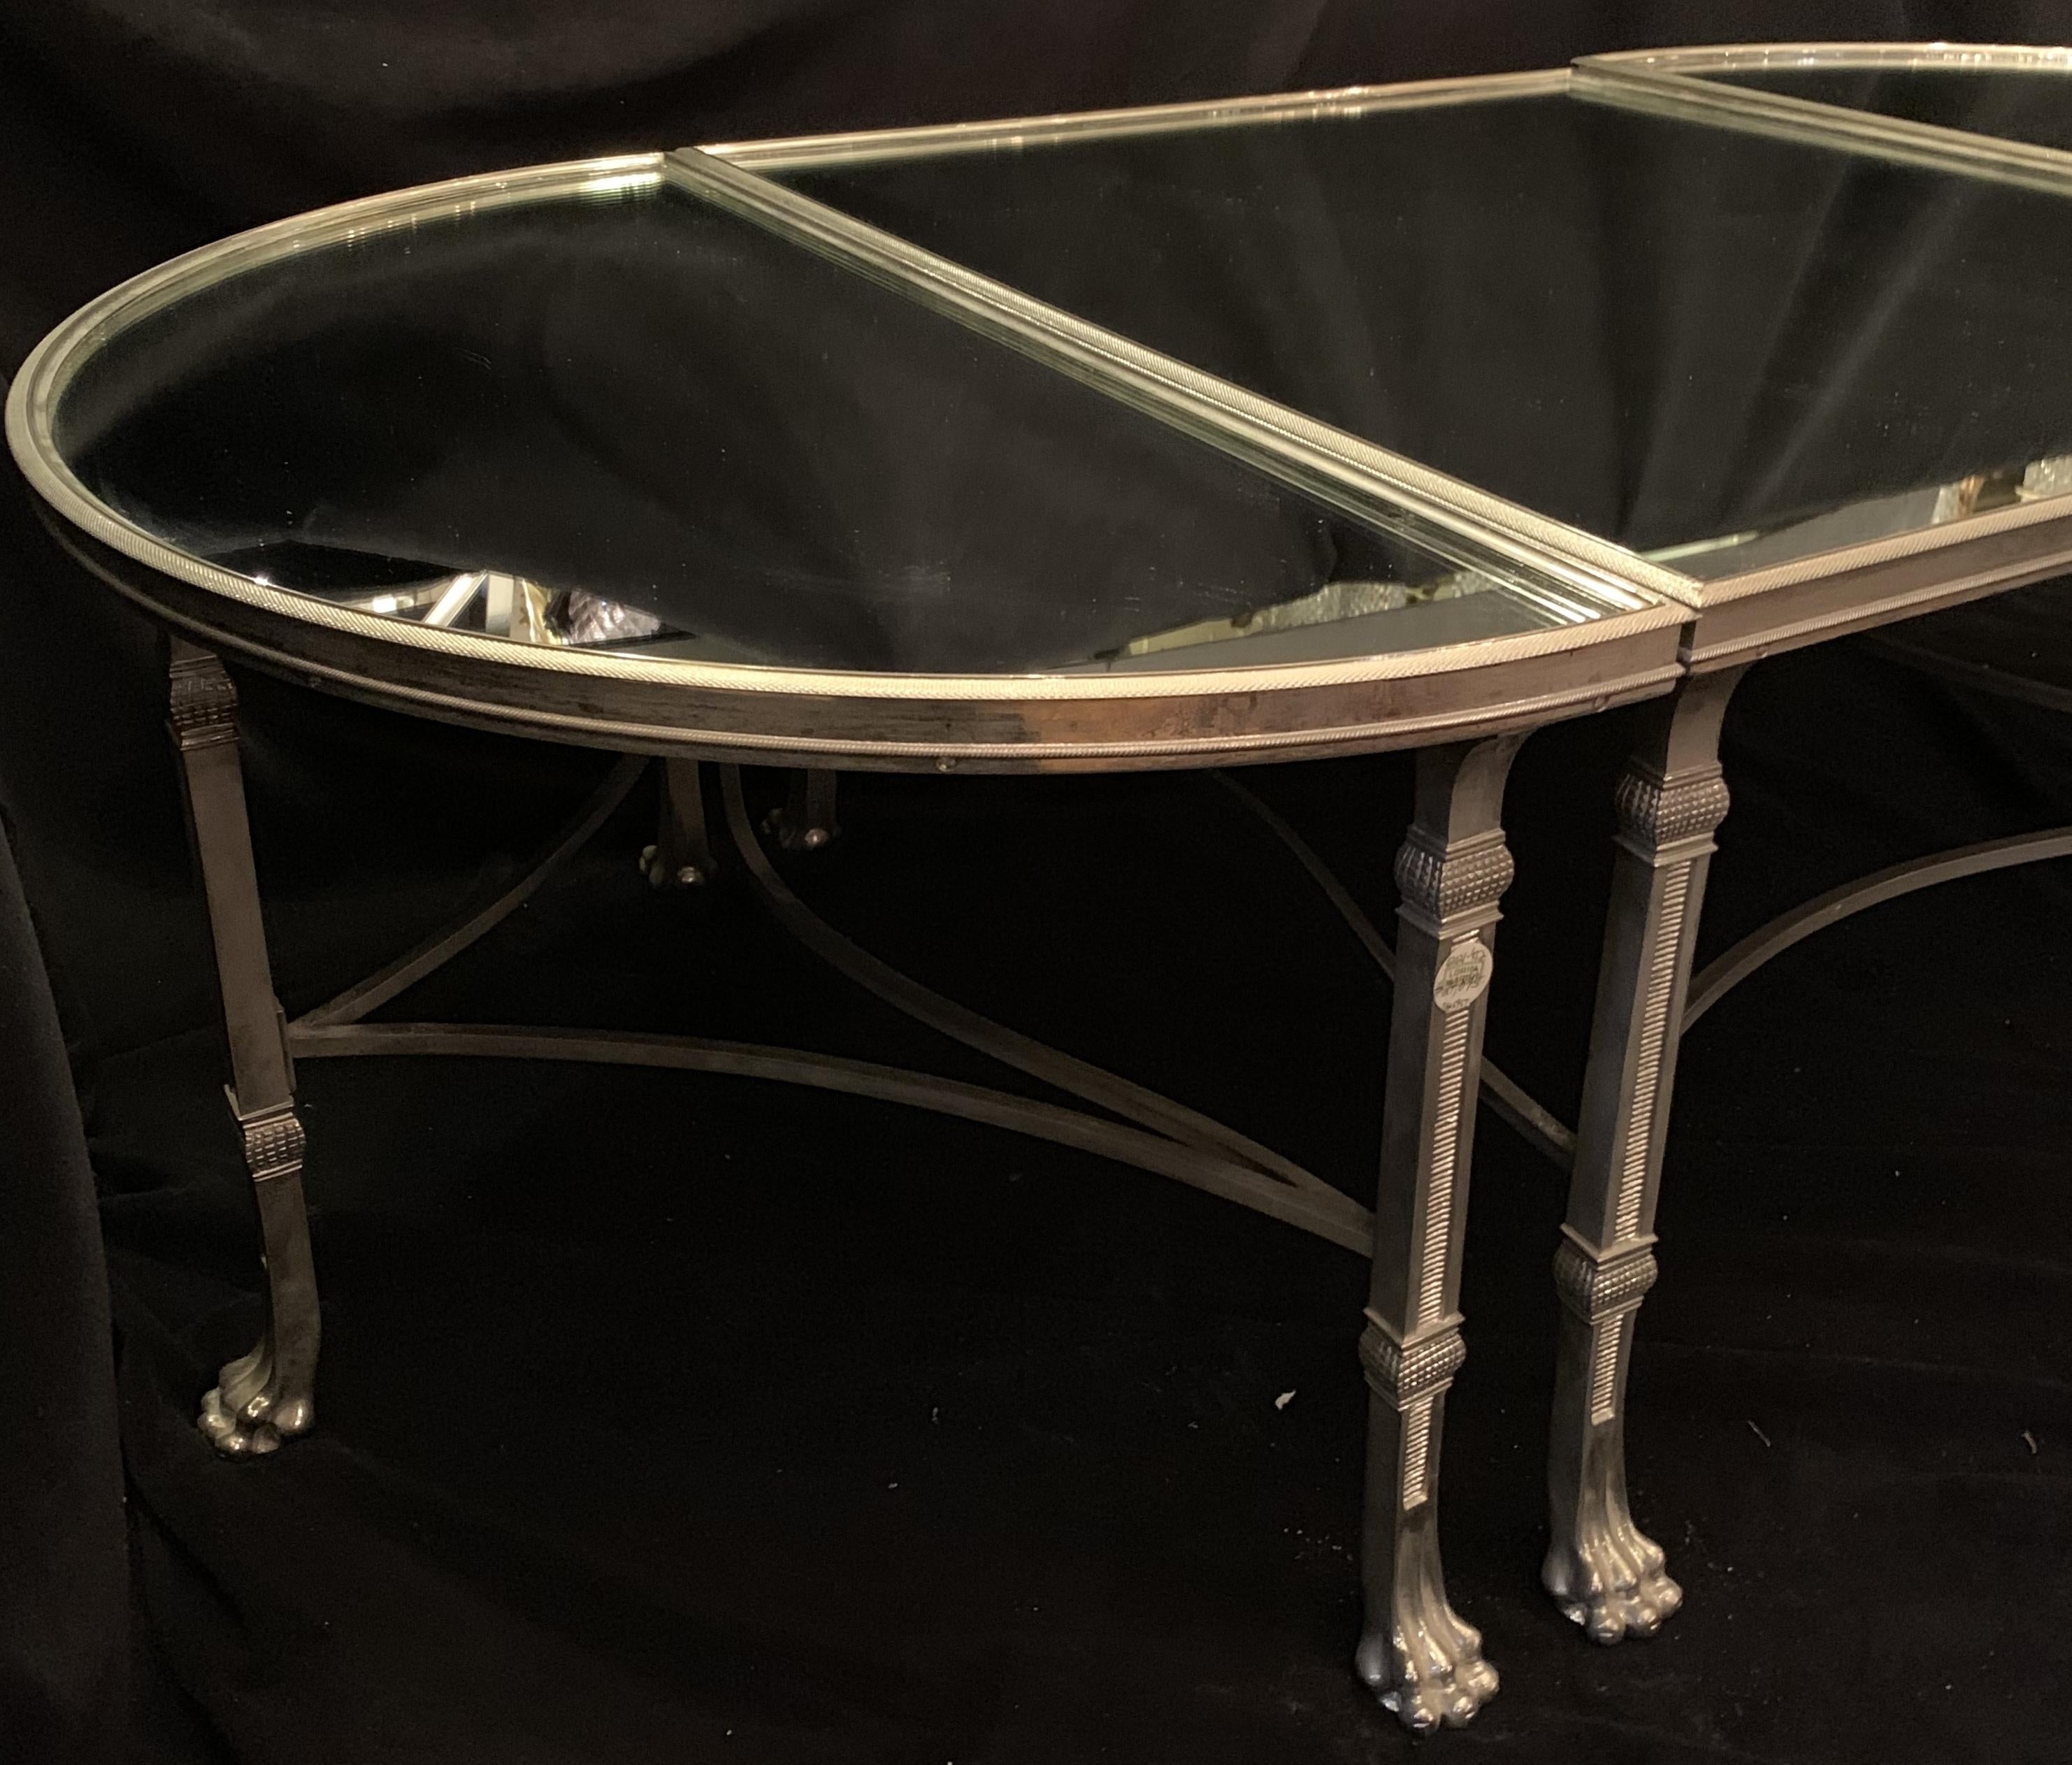 20th Century Wonderful French Polished Nickel Bronze Mirror Three Part Cocktail Coffee Table